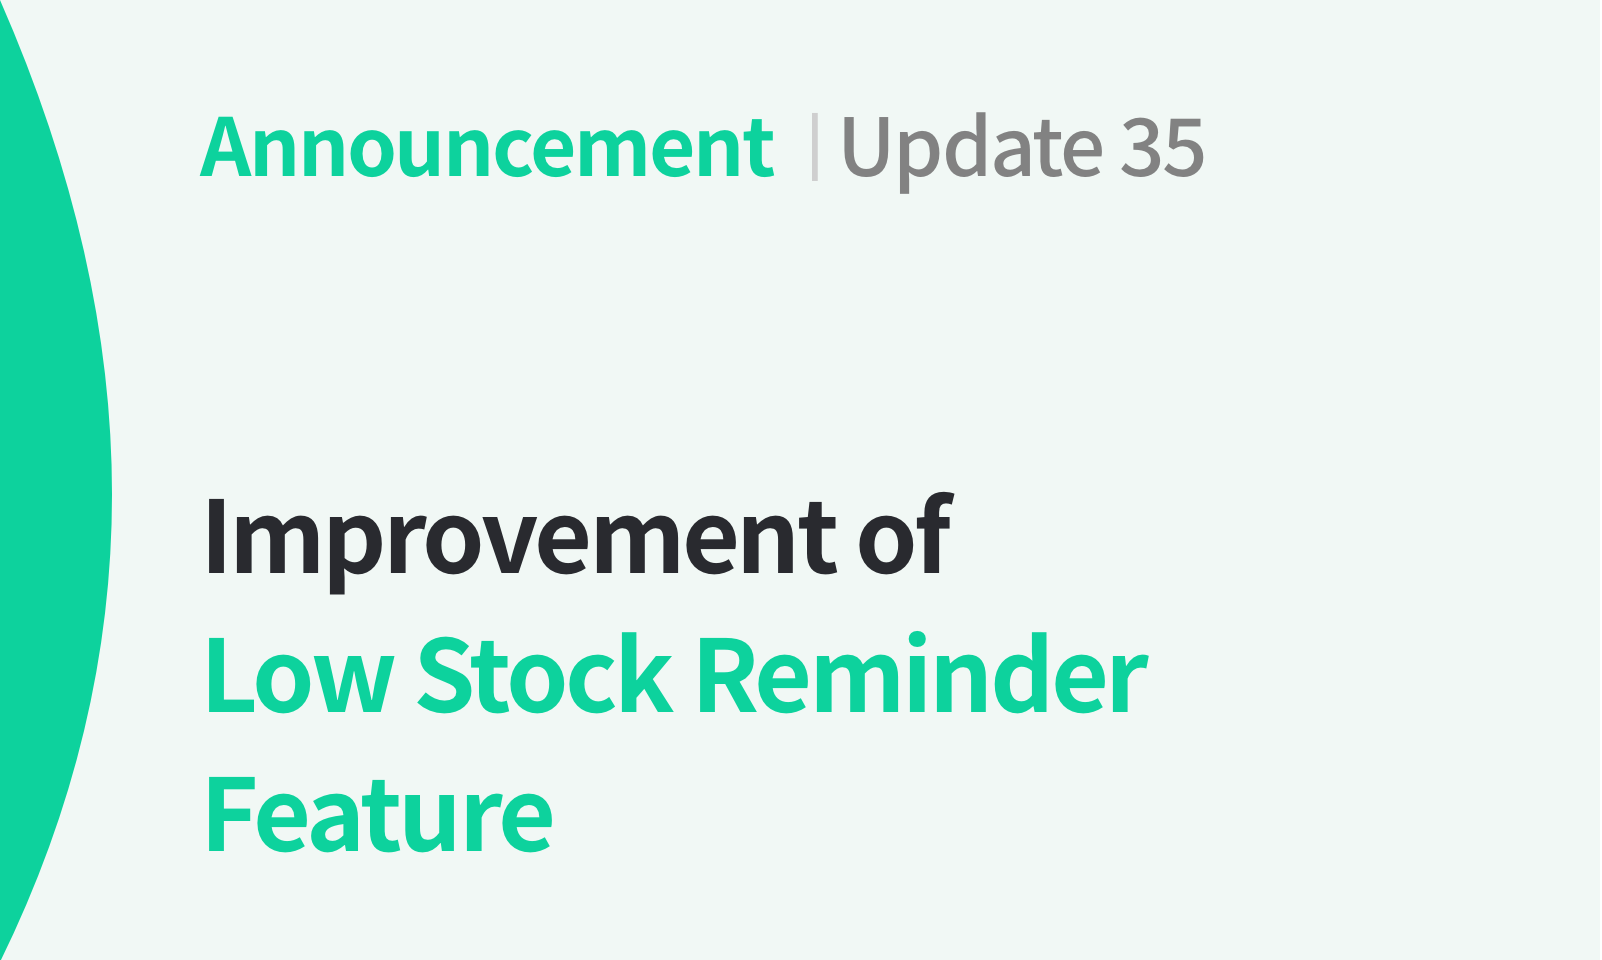 Low Stock Reminder will be Improved Soon